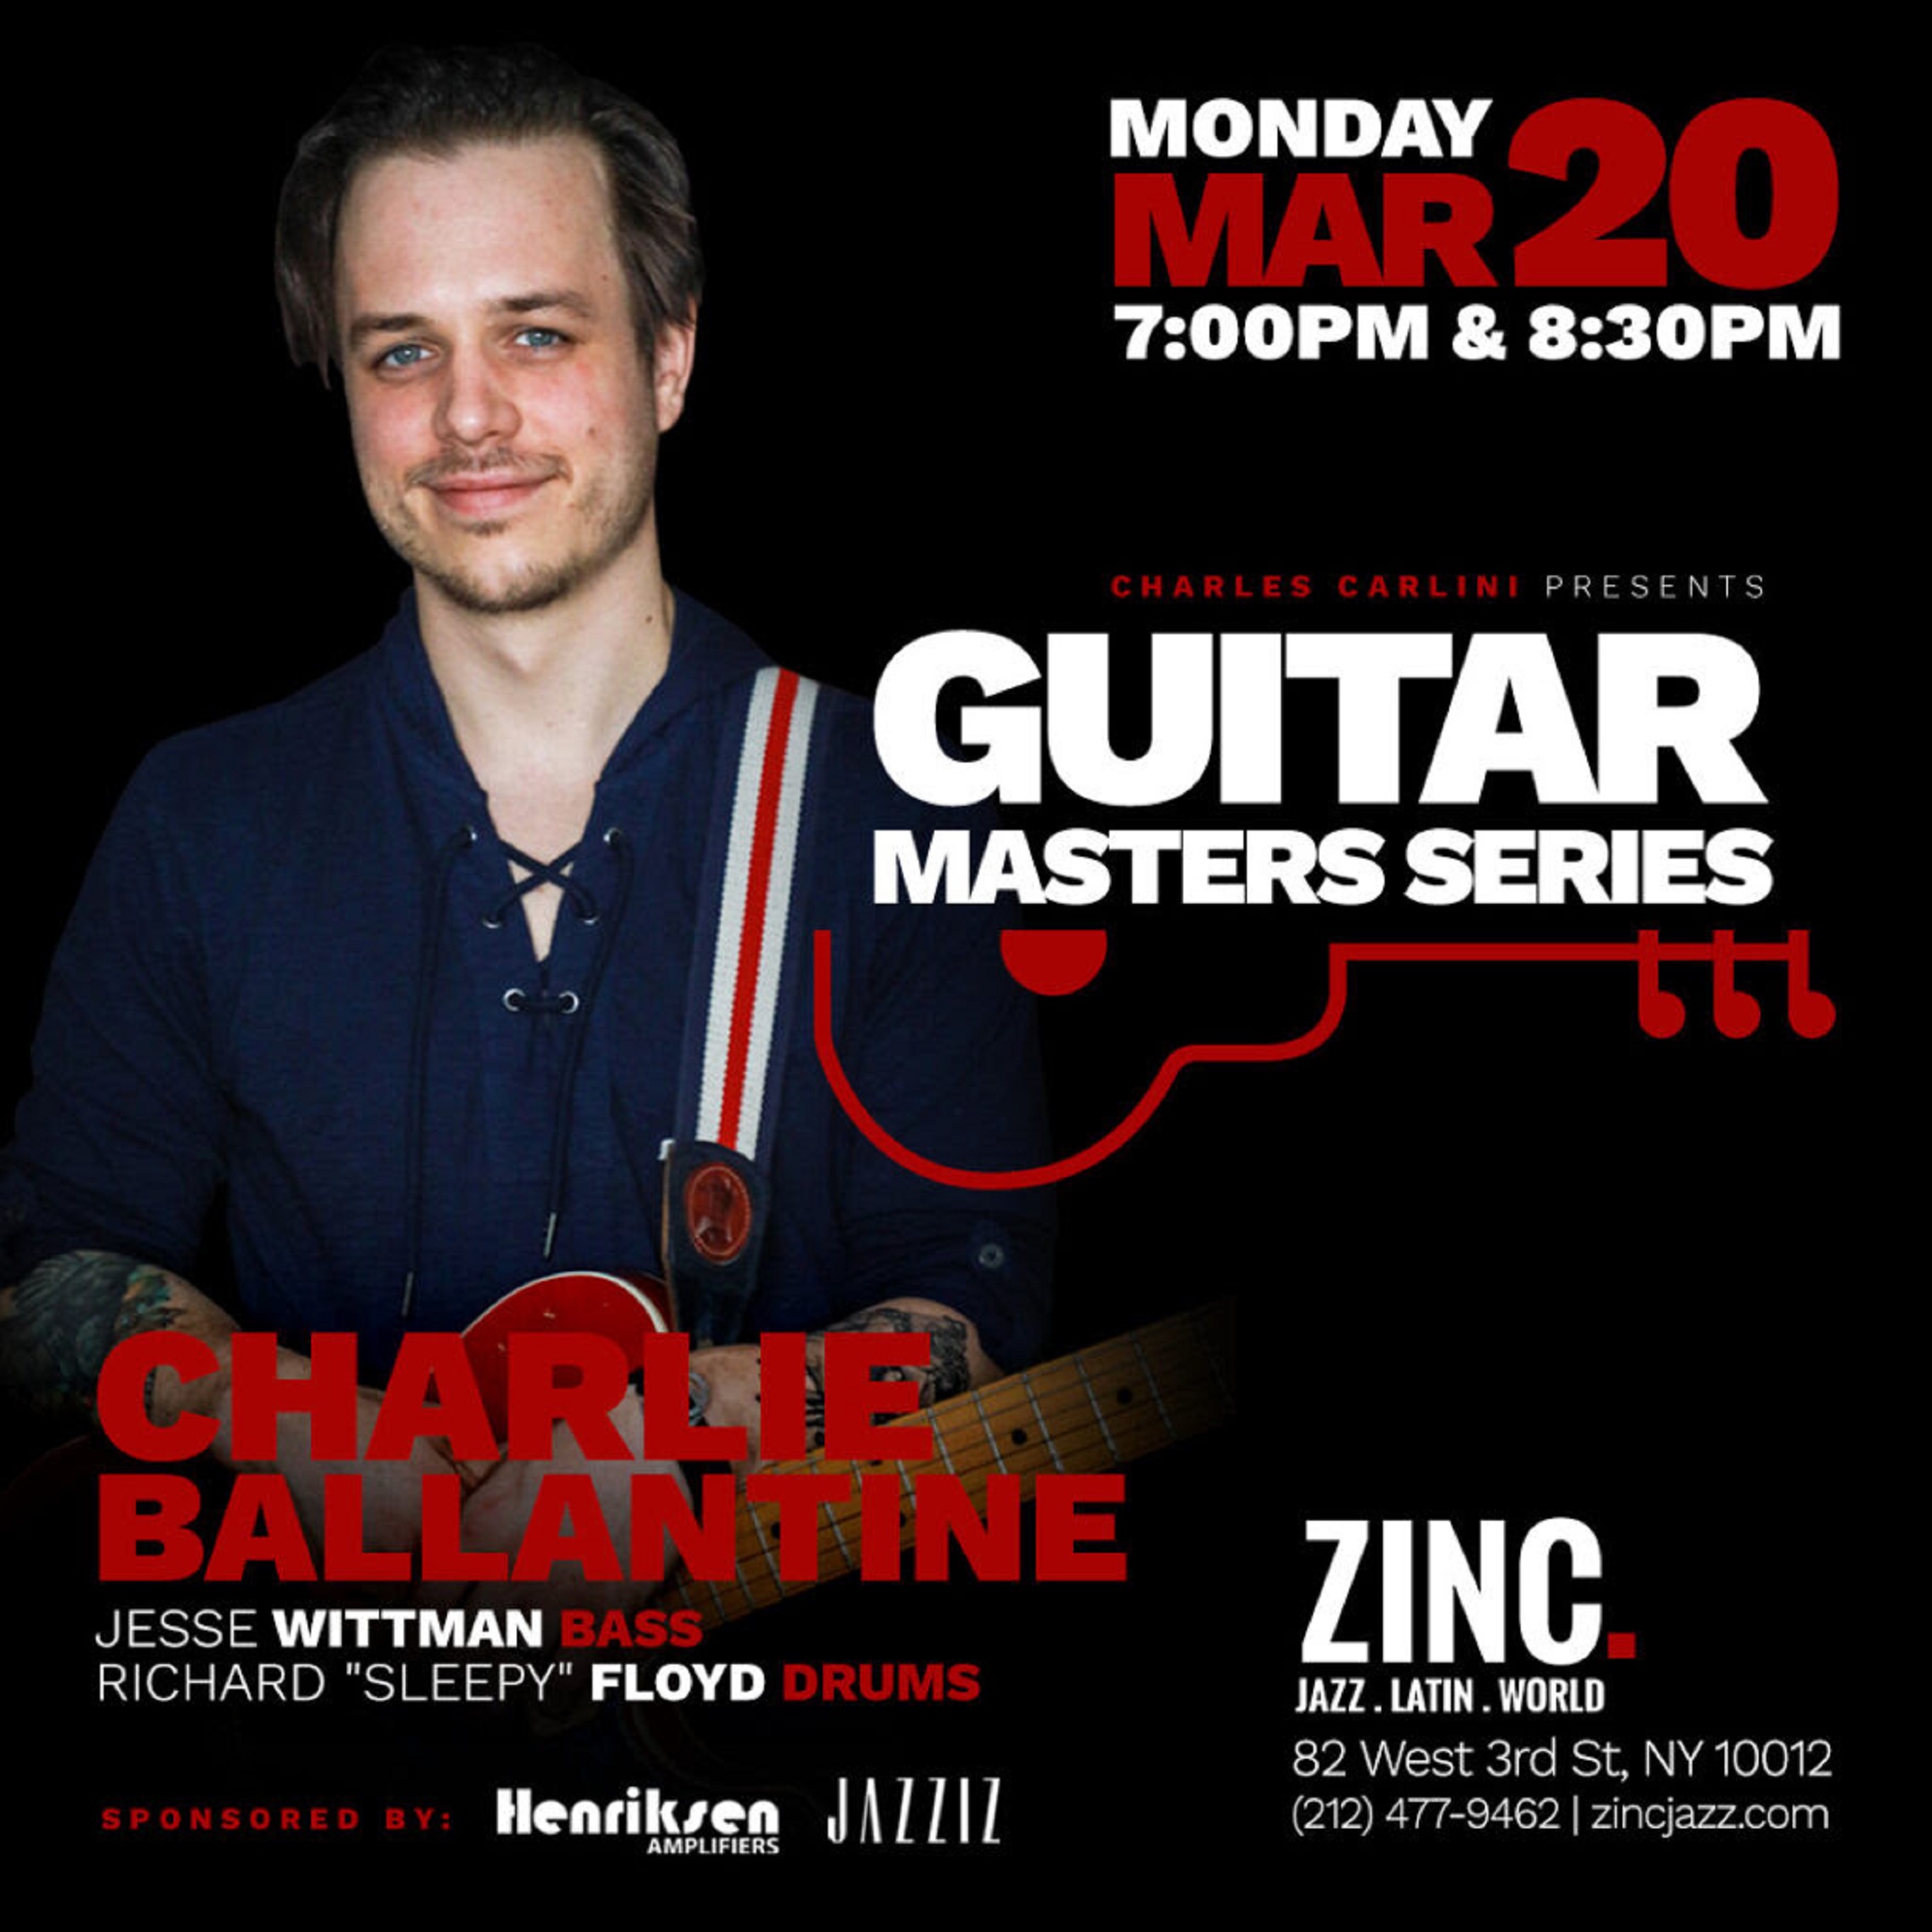 Acclaimed jazz guitarist Charlie Ballantine brings his formidable trio to Zinc on Monday, March 20